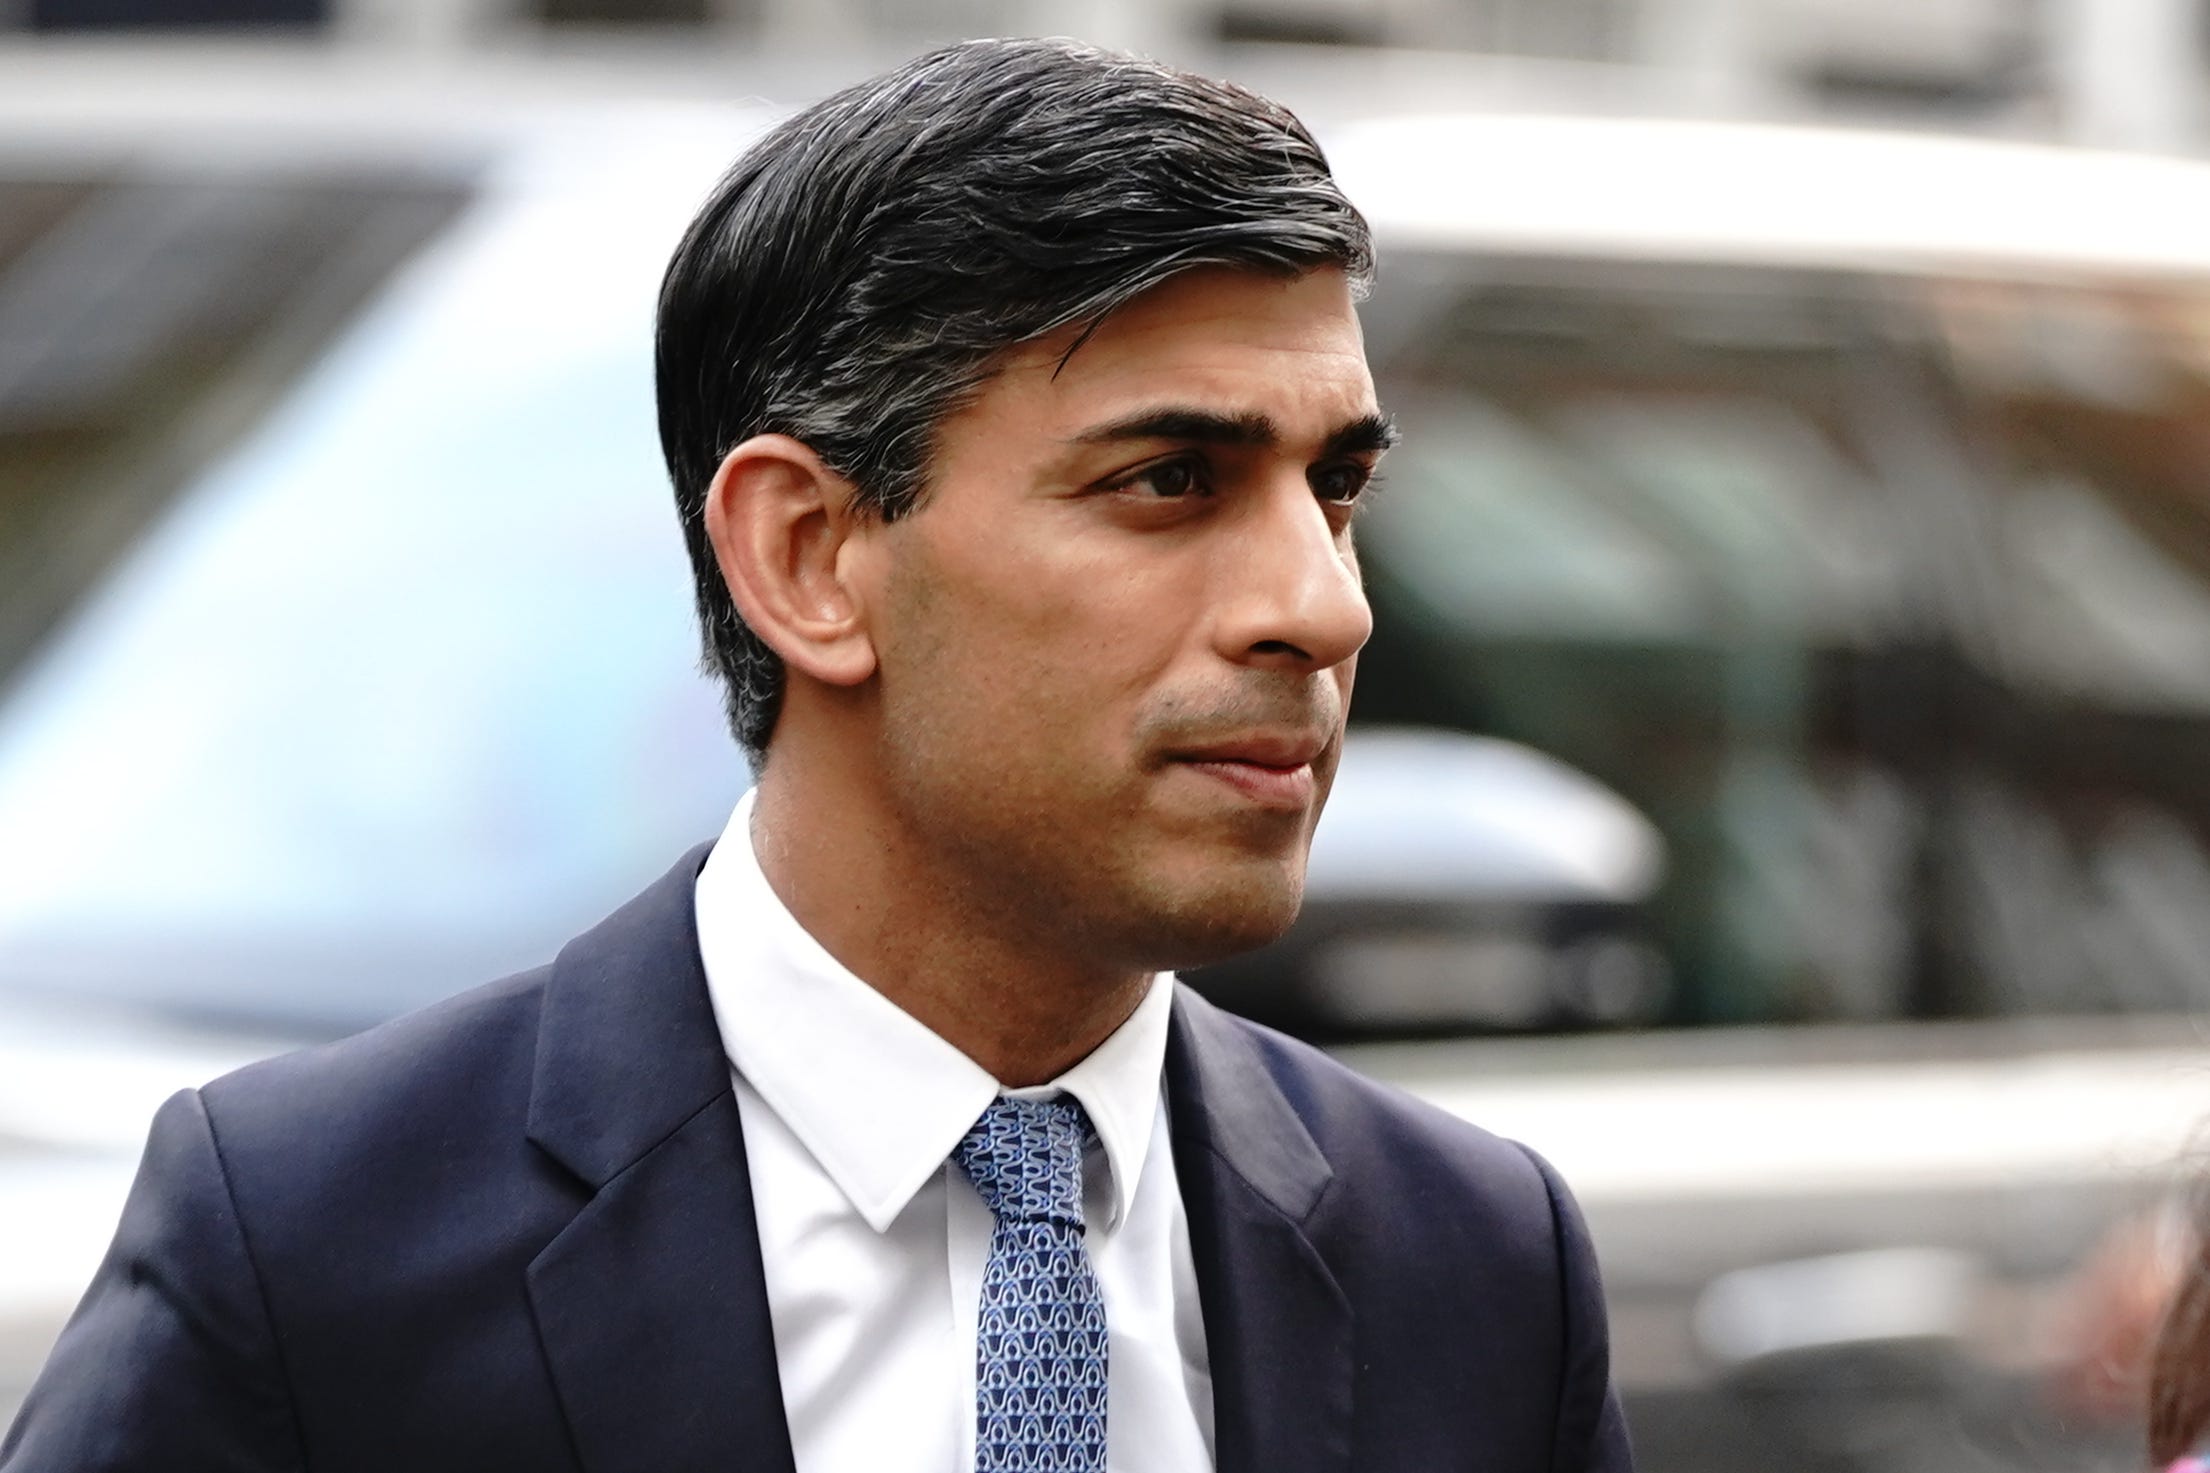 Rishi Sunak condemned the DWP’s use of language as ‘clearly offensive and unacceptable’